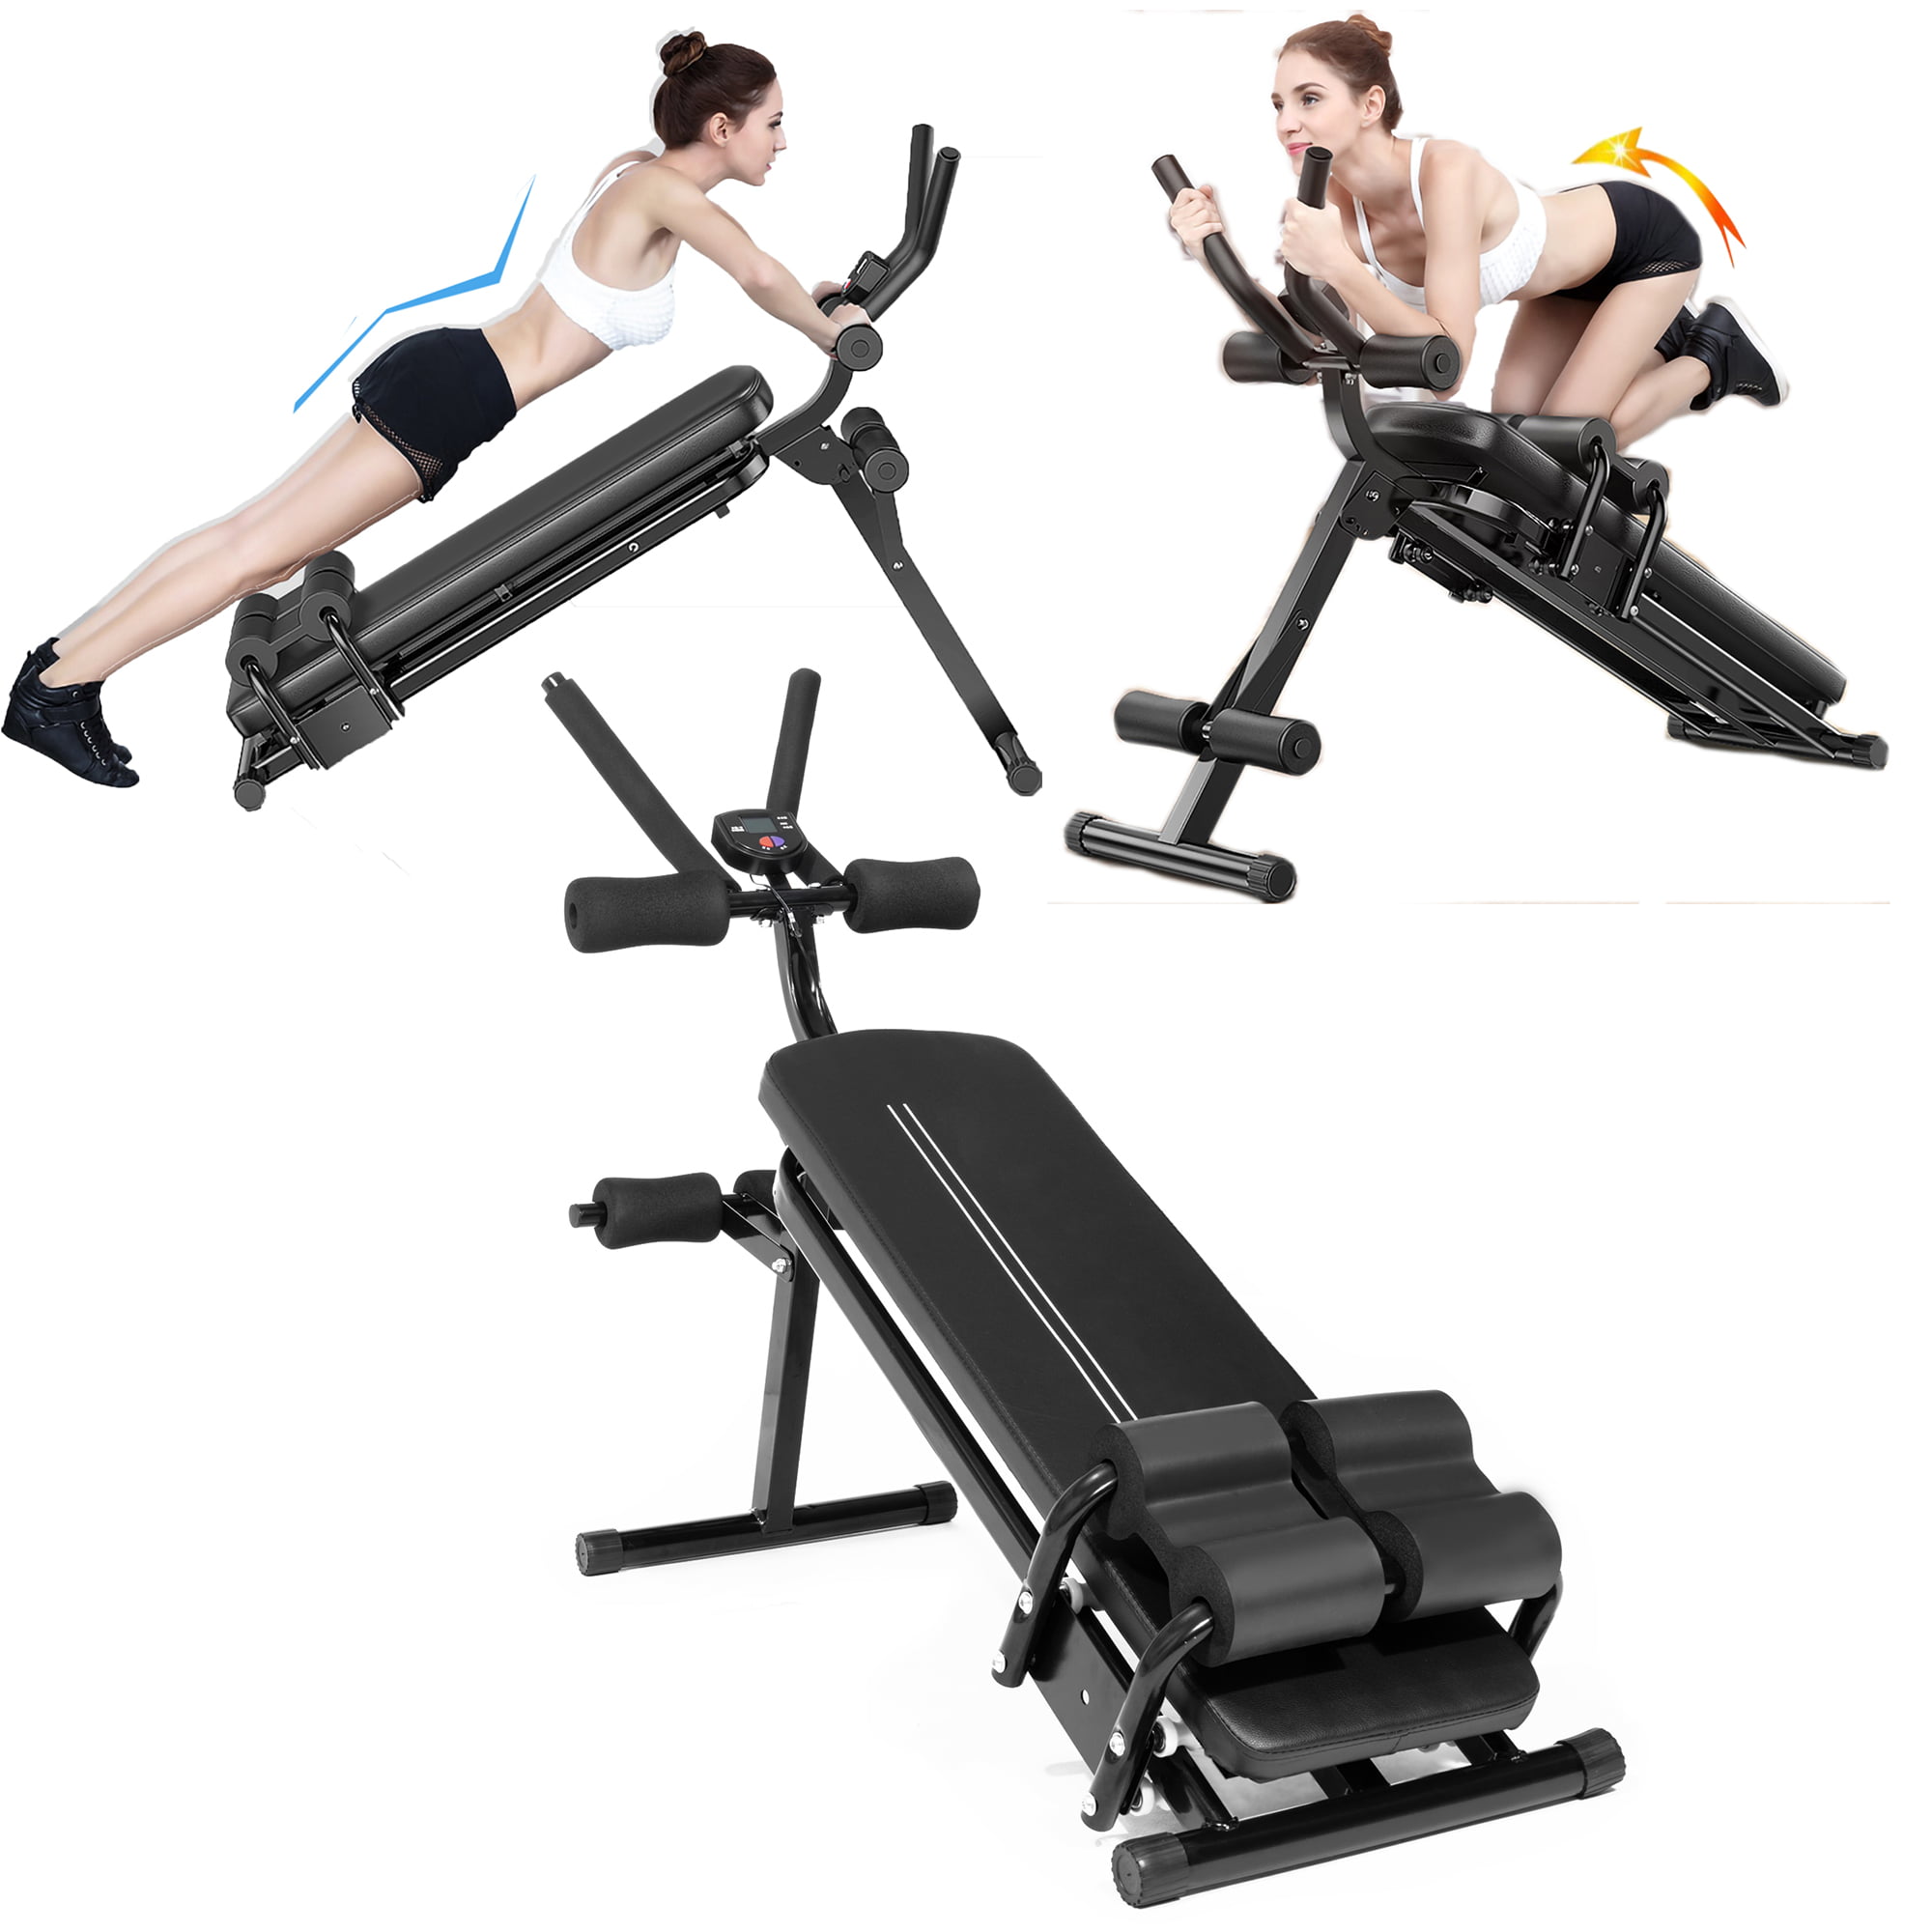 Foldable Decline Sit Up Bench Crunch Board Fitness Gym Exercise Weight Bench USA 